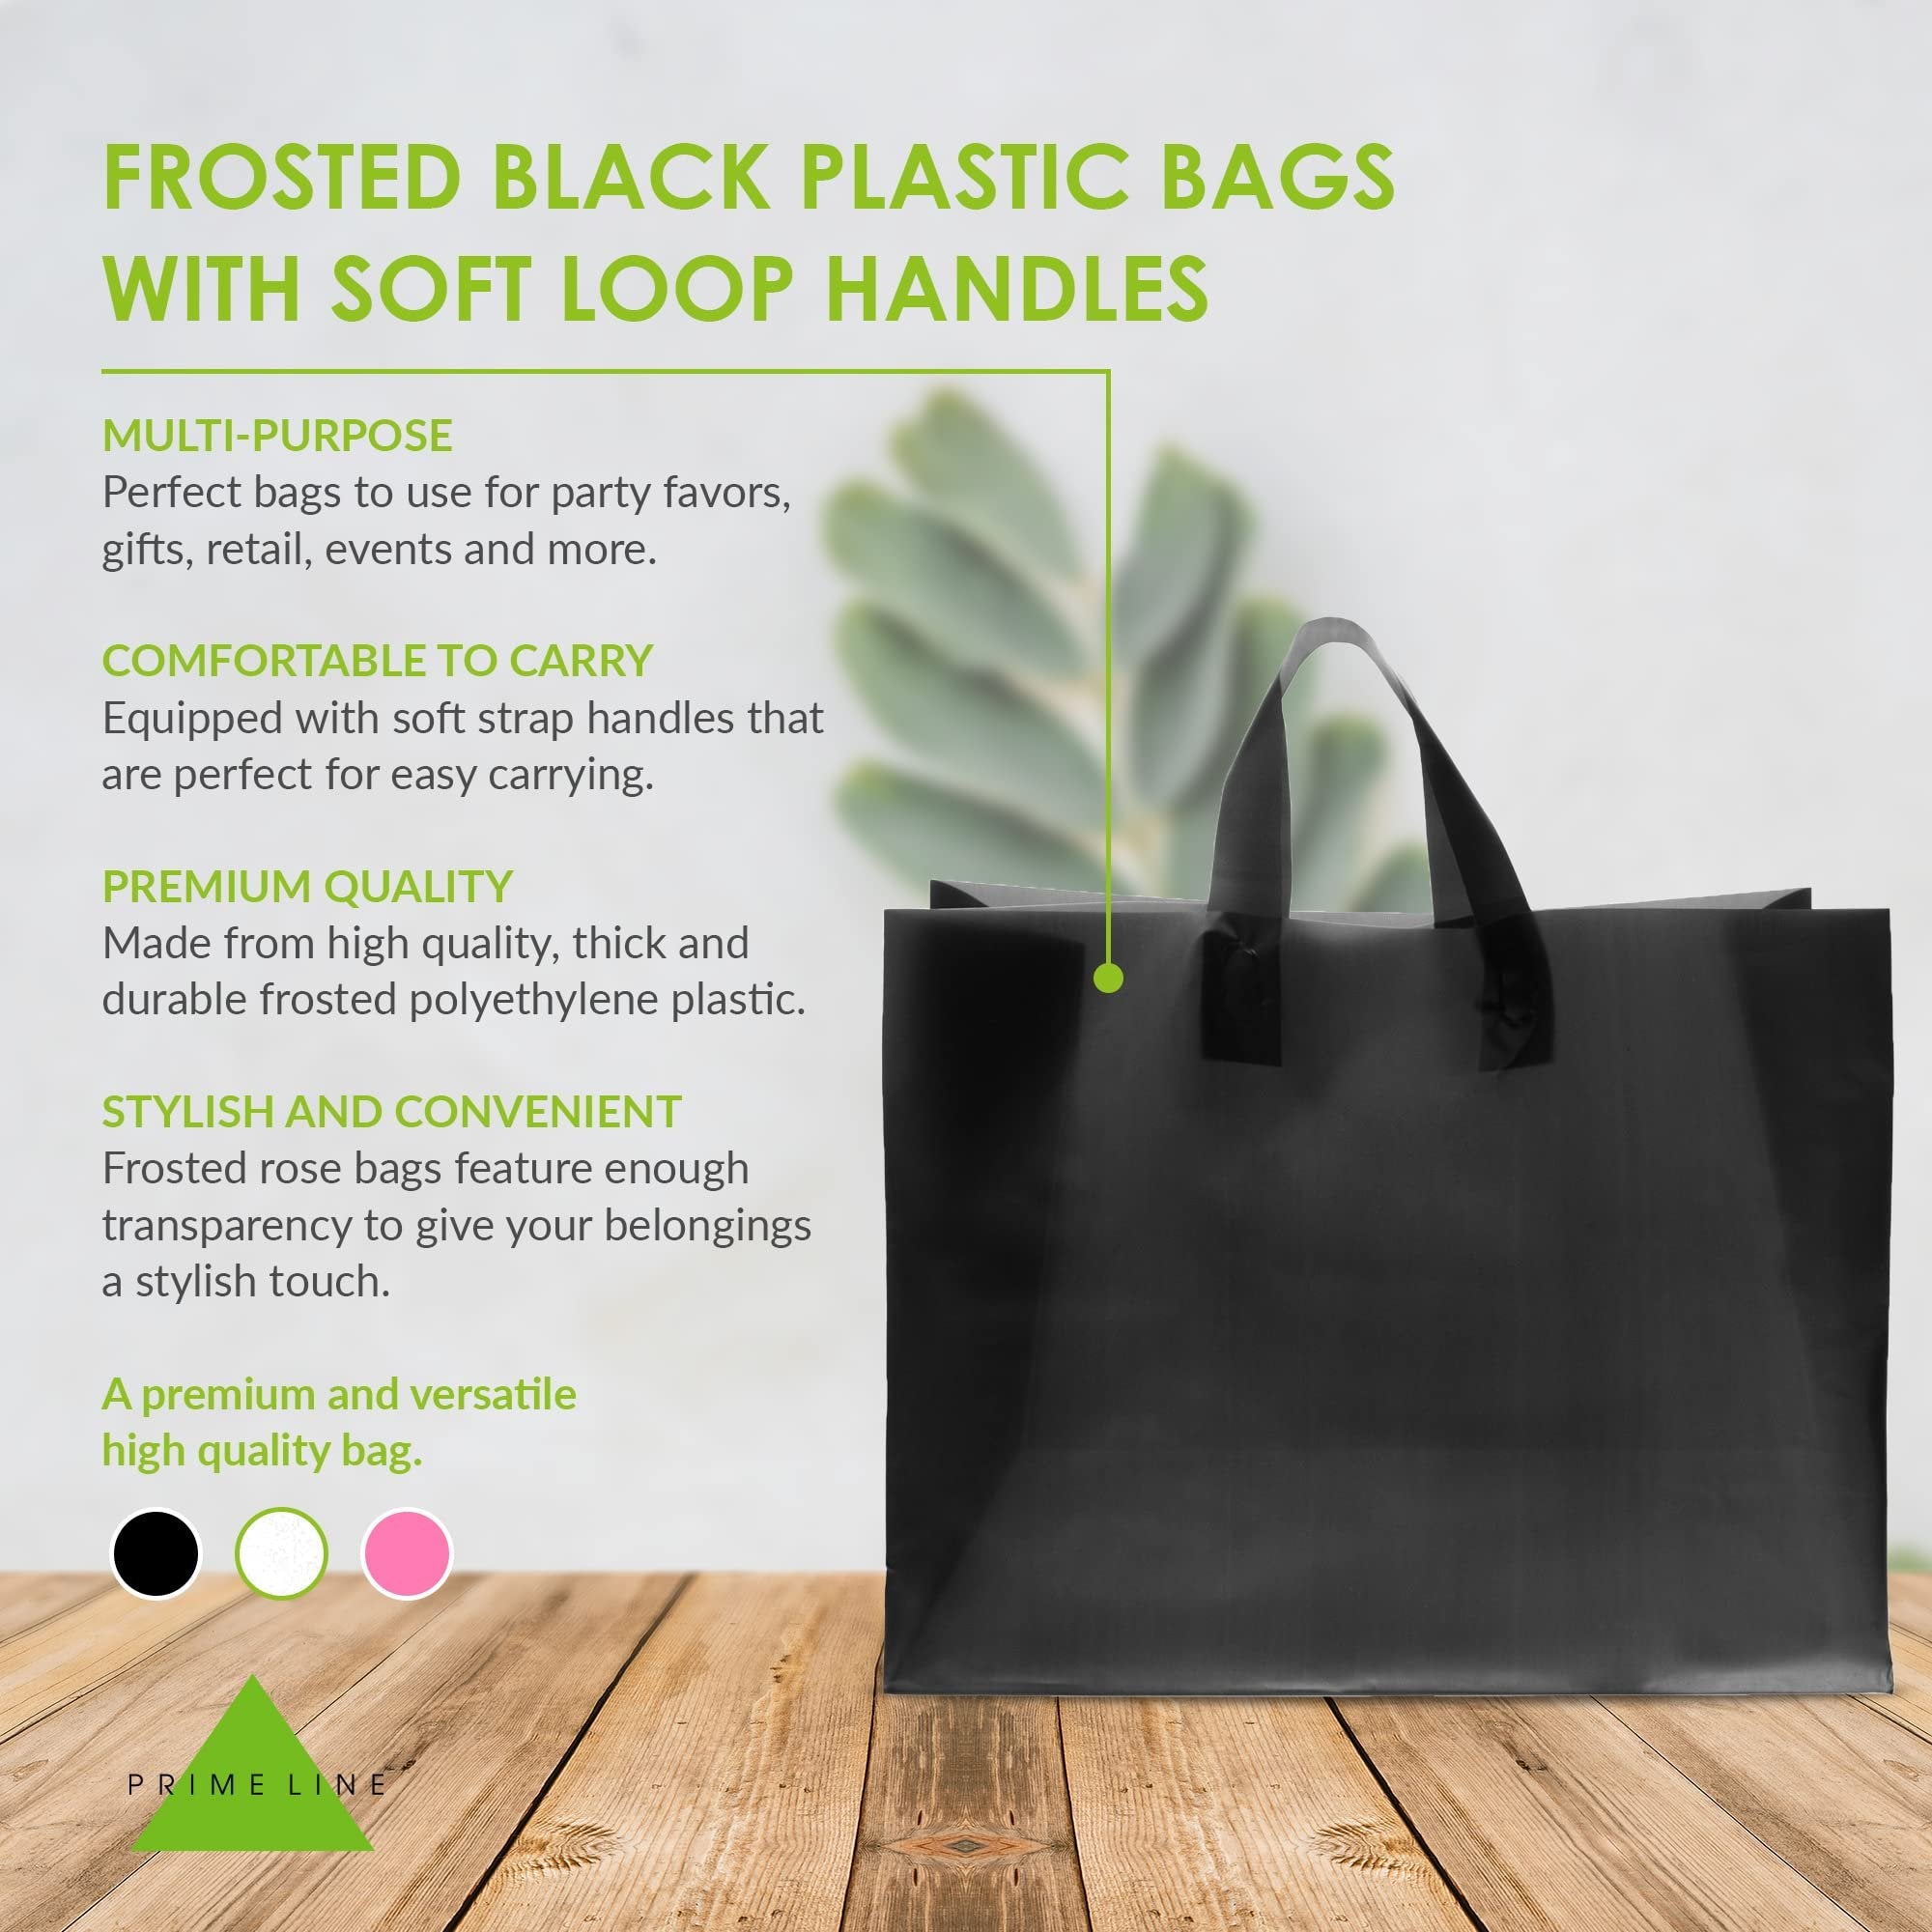 Prime Line Packaging Black Plastic Bags - 16x6x12 Inch (100 Count) with Handles, Gusset & Cardboard Bottom - Perfect for Retail, Gifts, Events